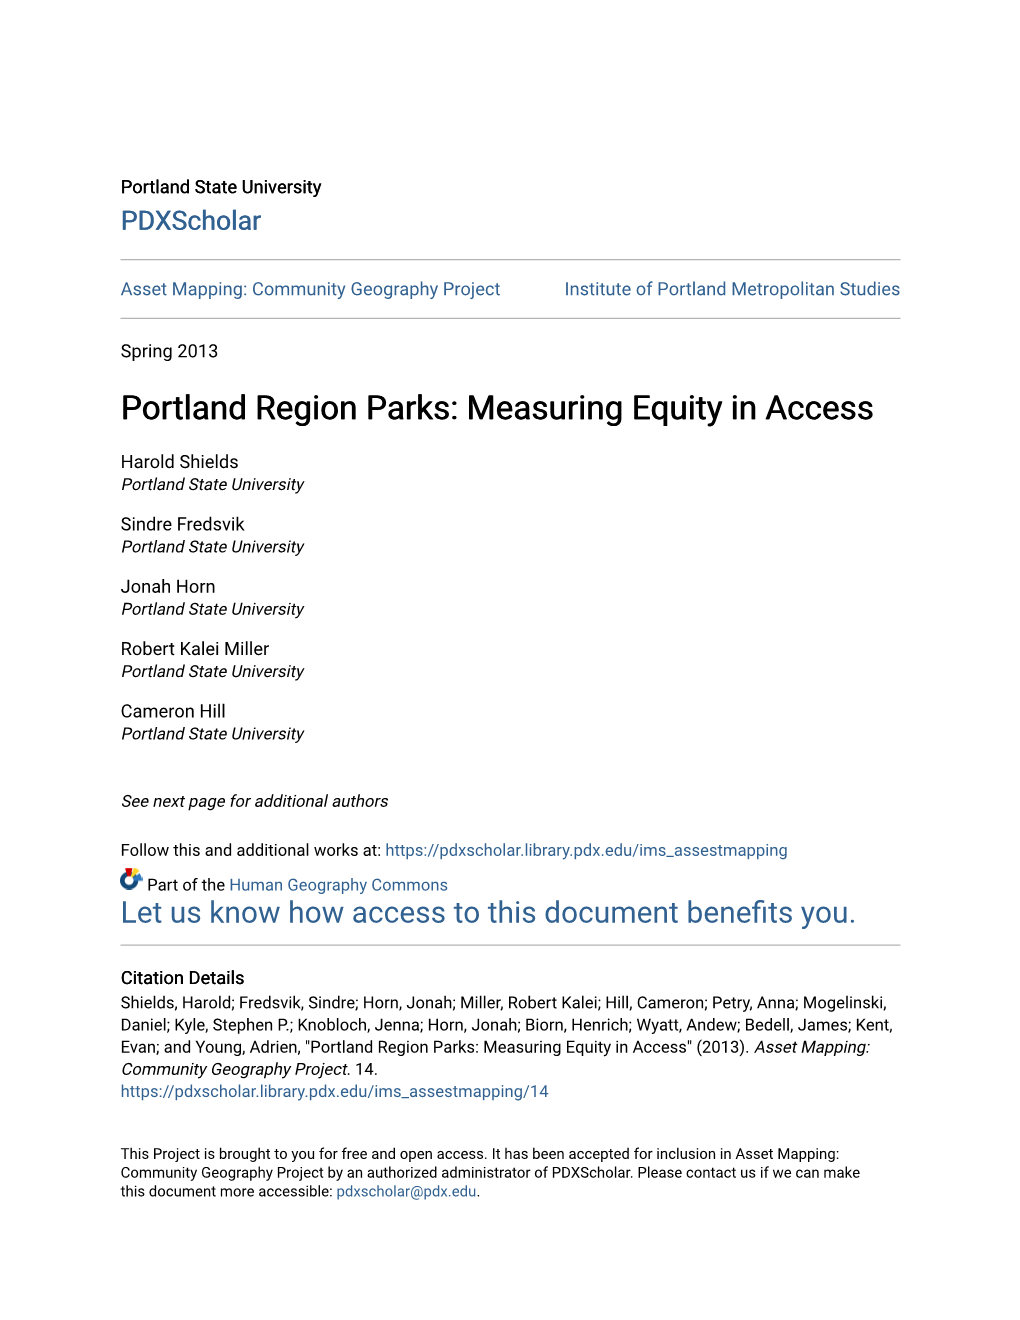 Portland Region Parks: Measuring Equity in Access